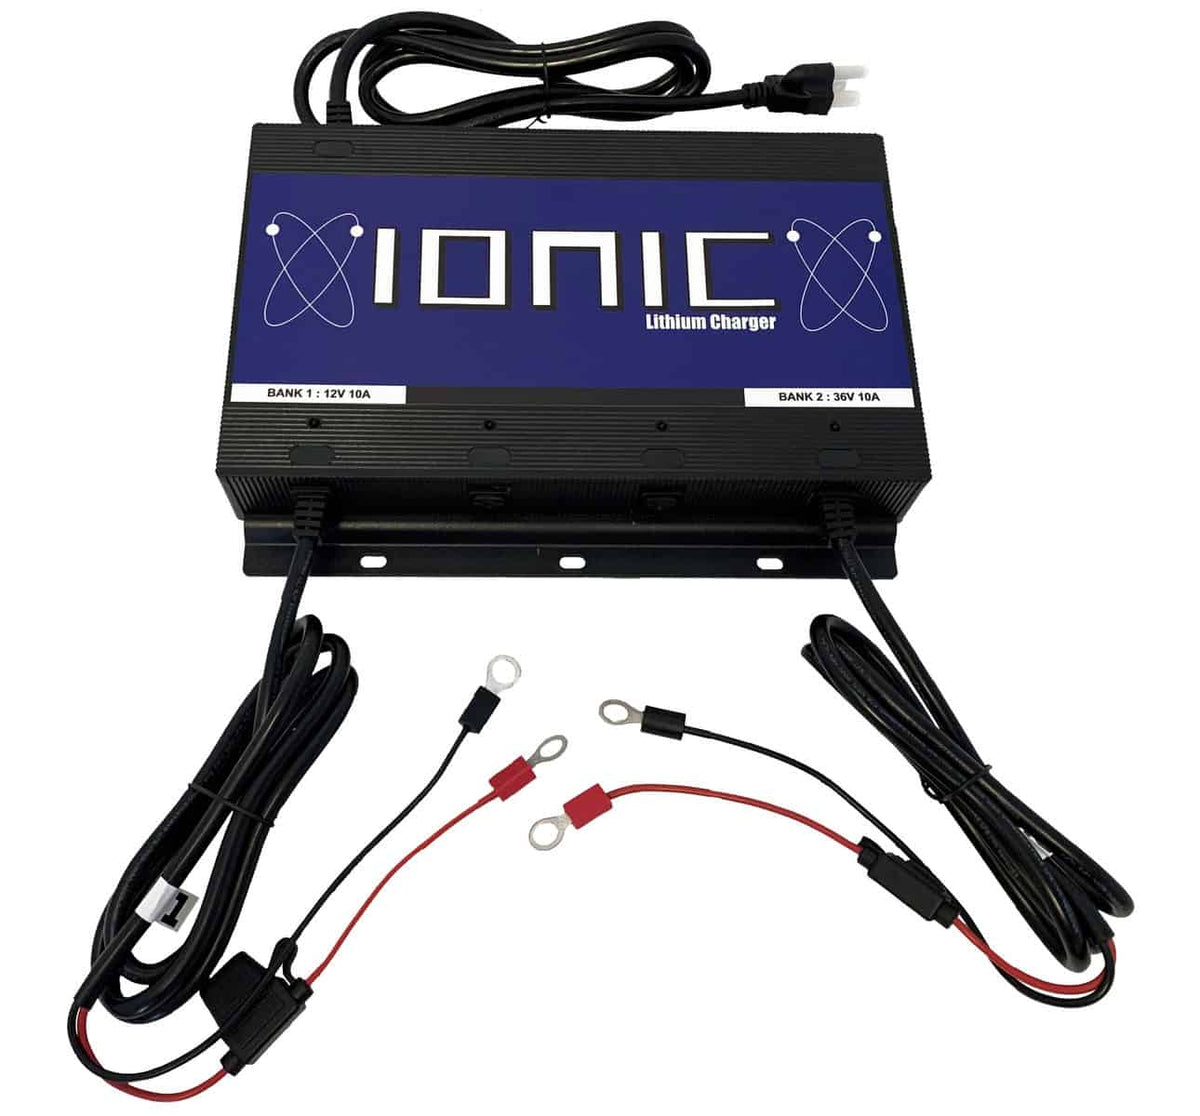 Ionic 2 Bank Charger 36V10A, 12V10A